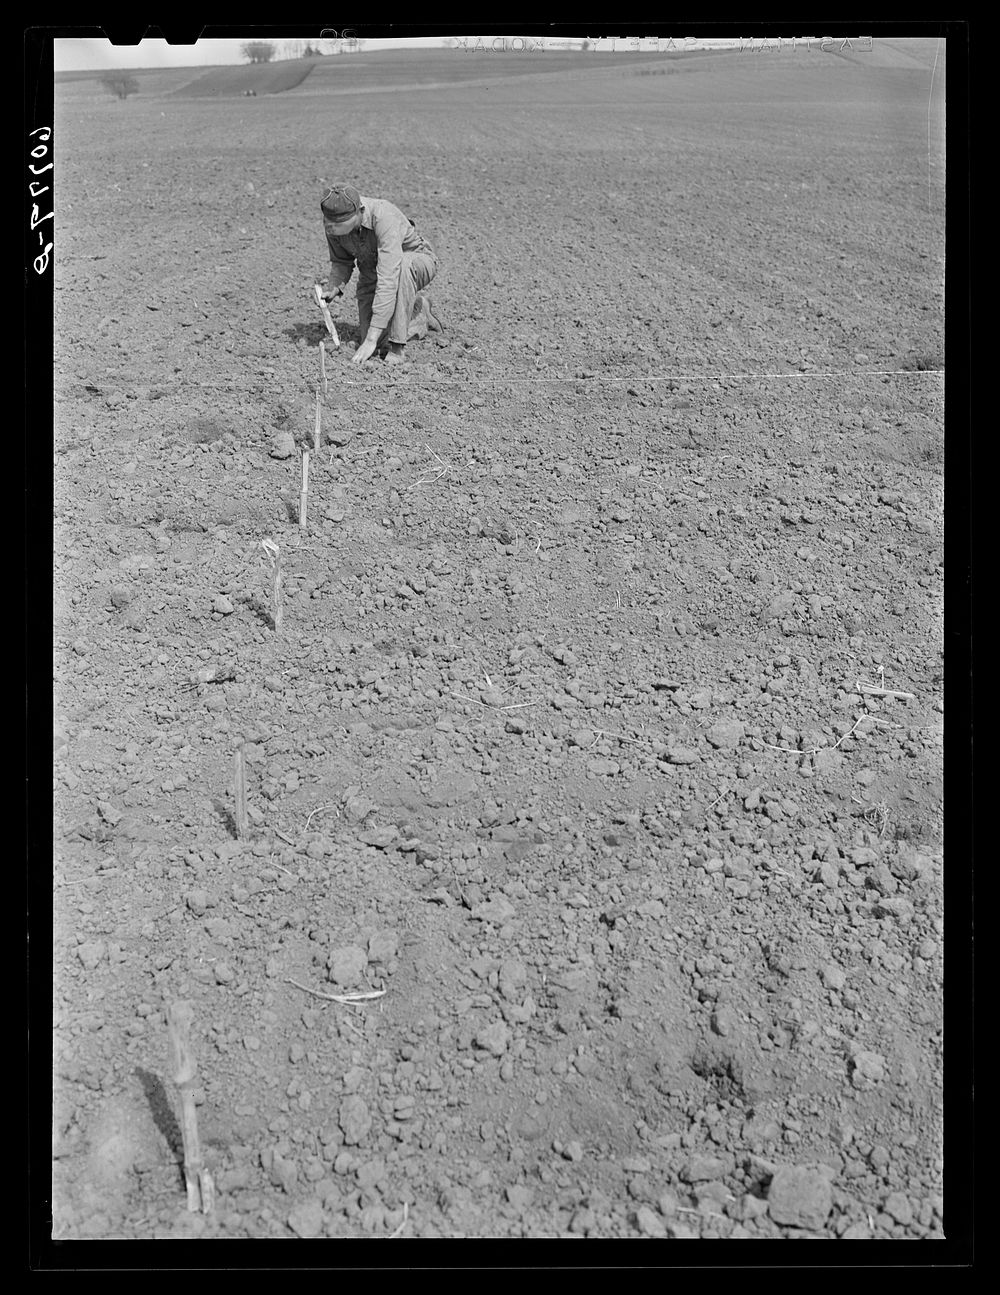 Checking the corn in hills. A cornstalk is placed at every spot where the planter dropped corn to determine whether check…